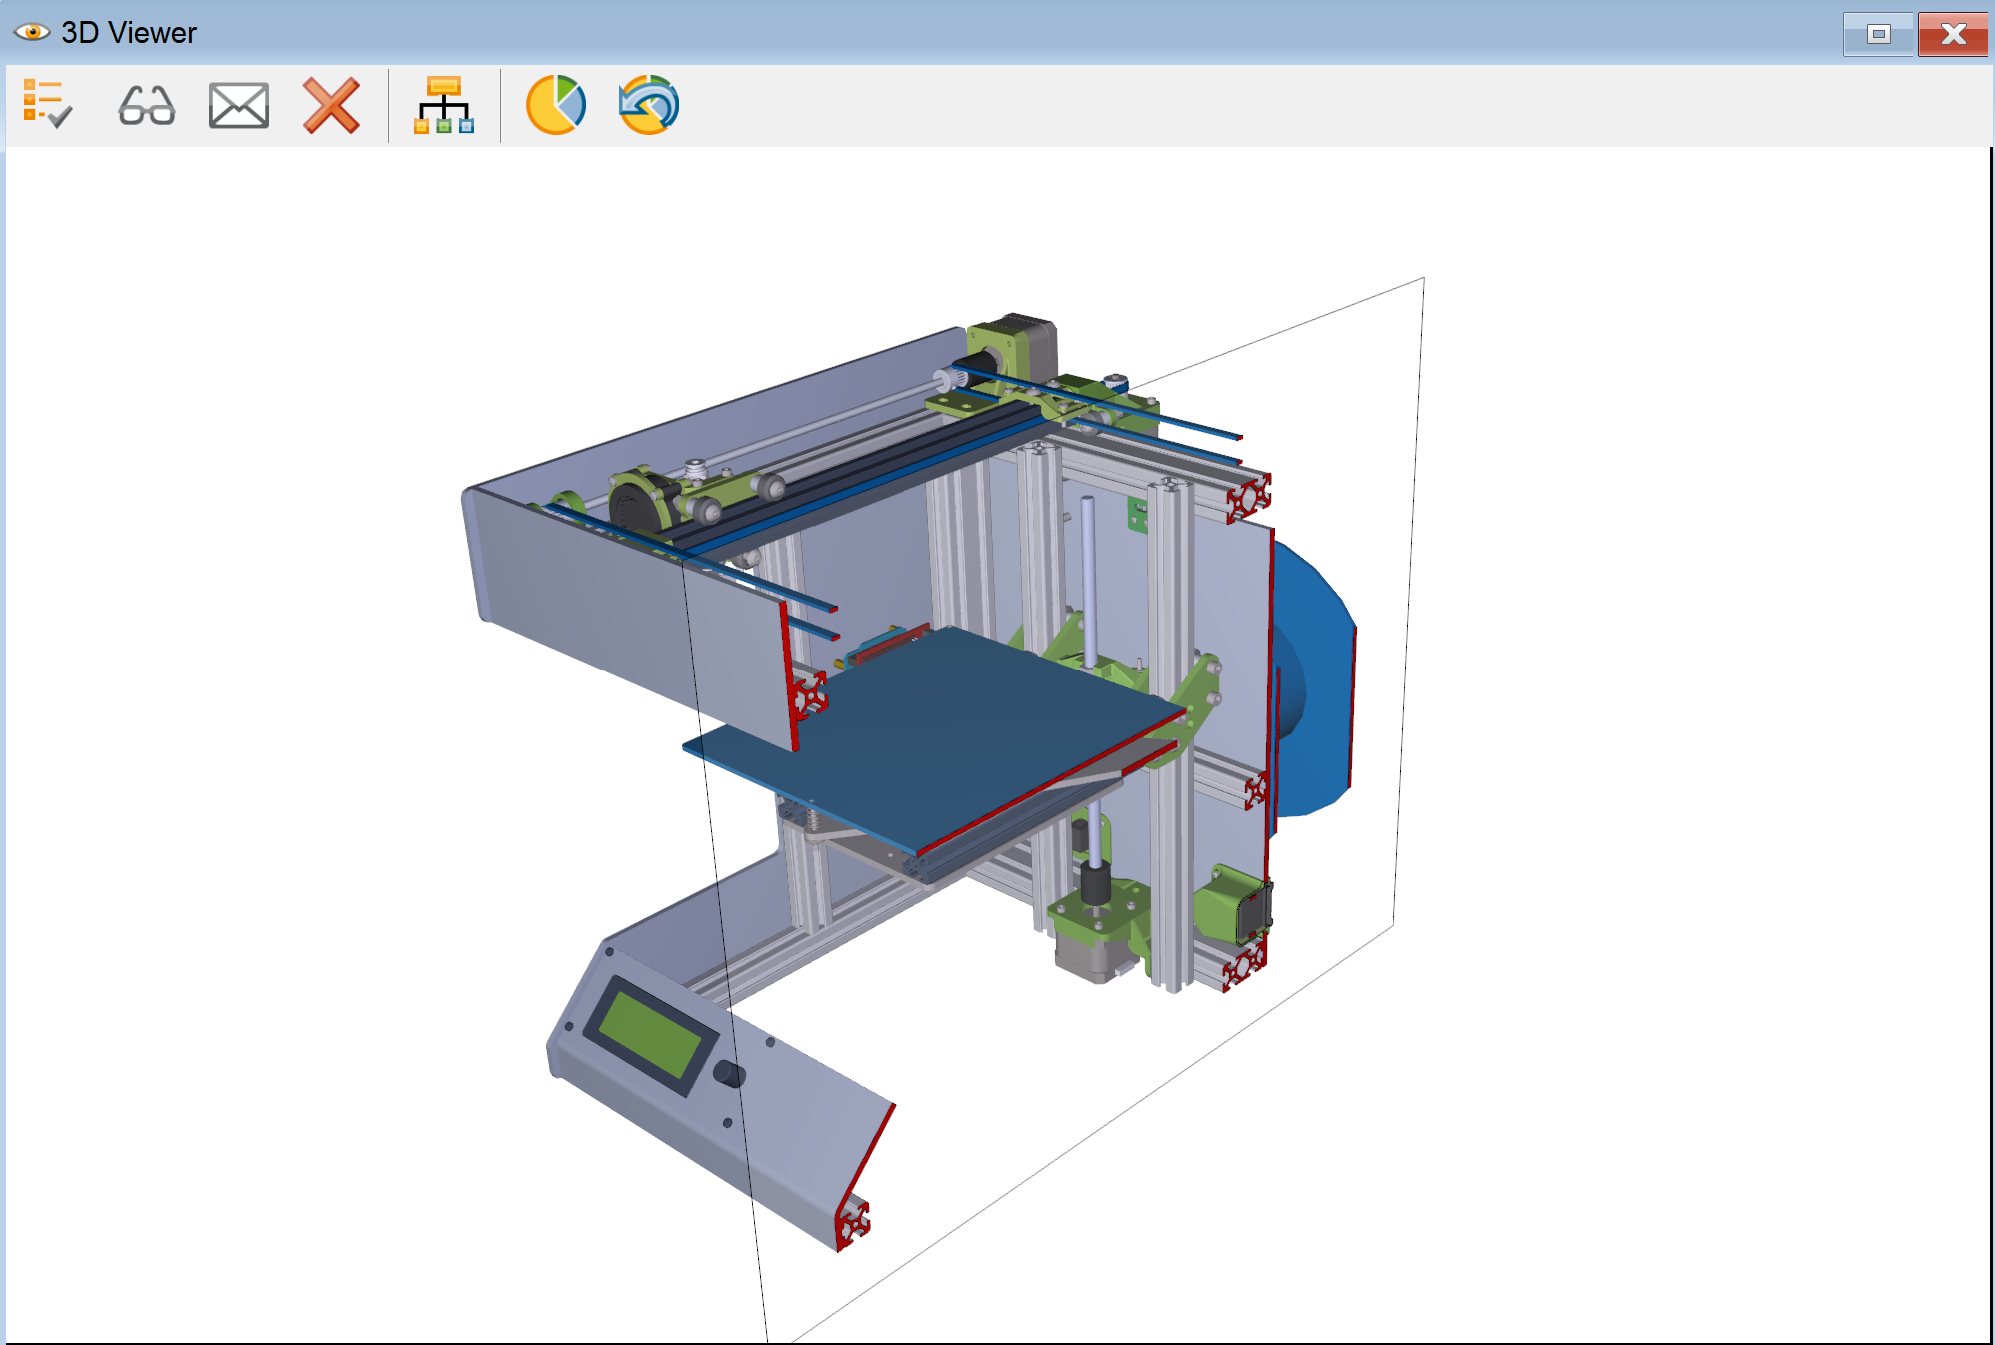 SAP 3D Visual Enterprise Viewer with model and cross-section view